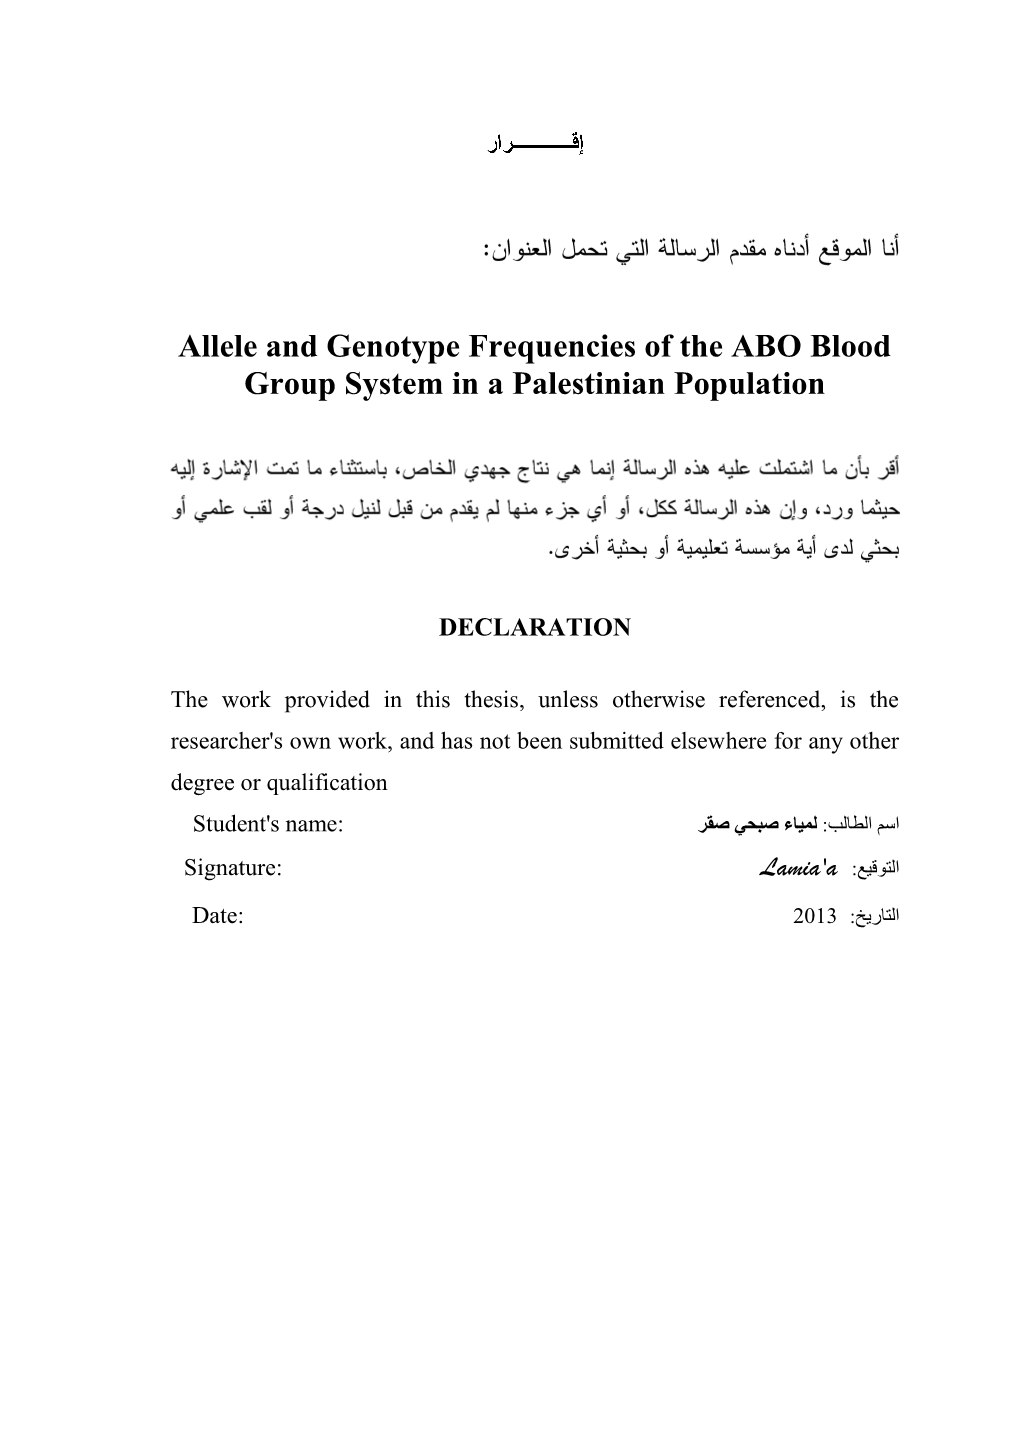 Allele and Genotype Frequencies of the ABO Blood Group System in a Palestinian Population